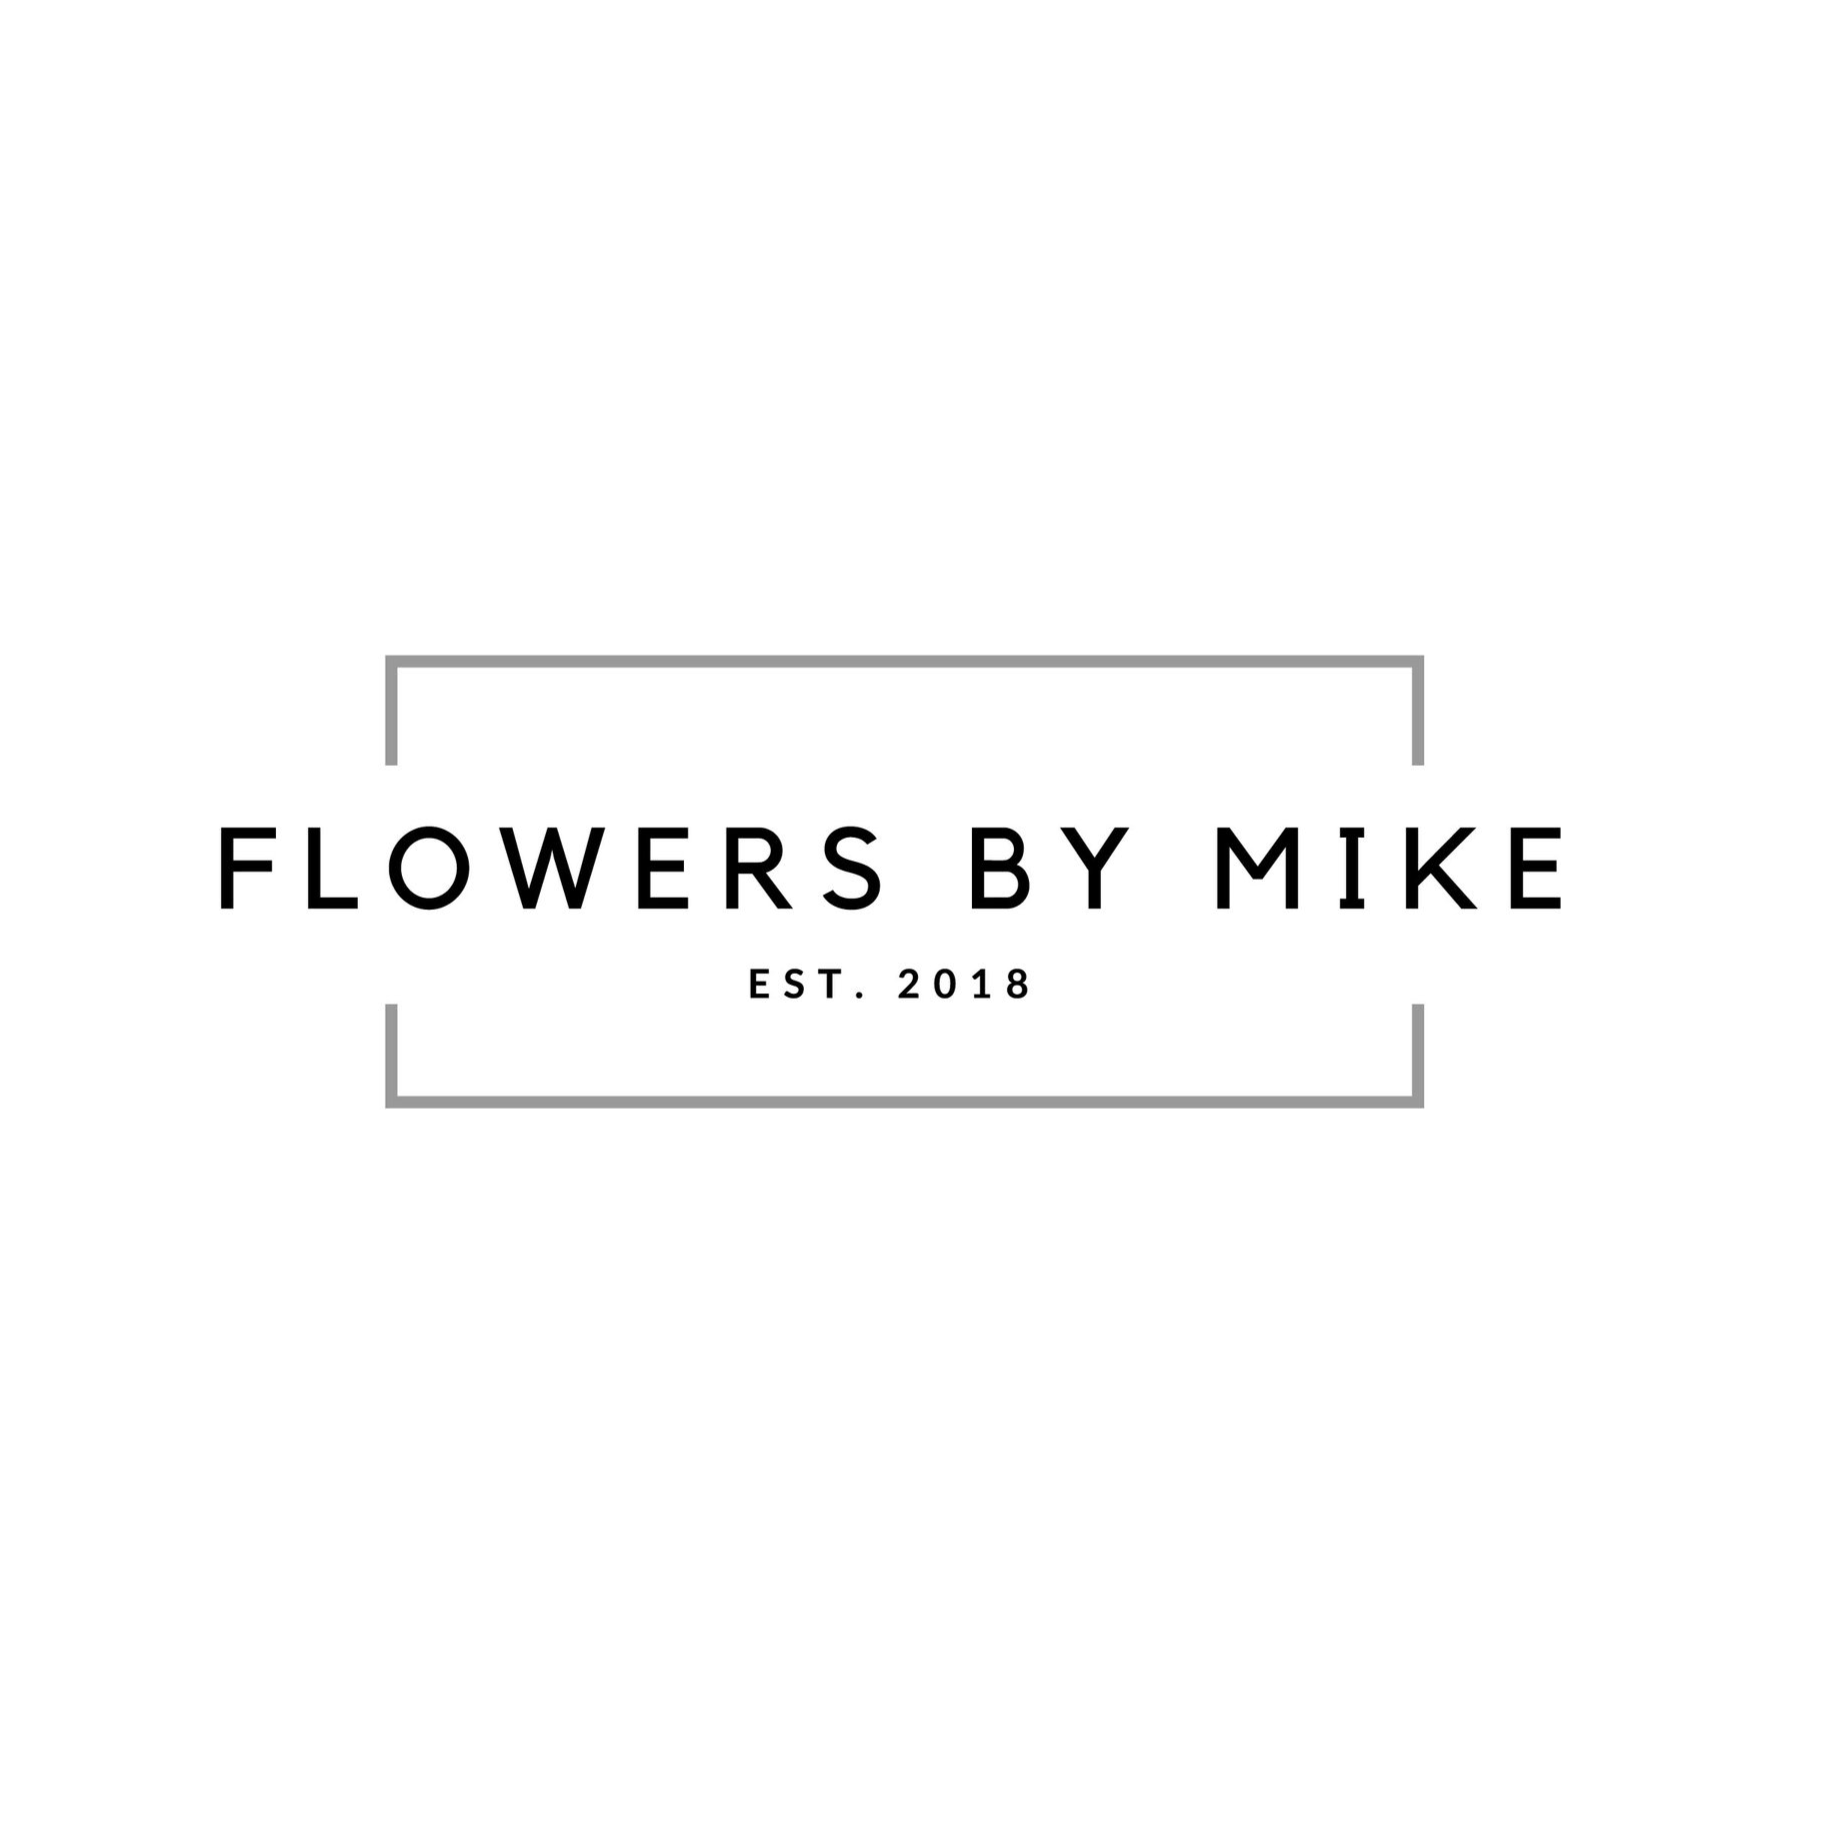 Flowers by Mike Logo